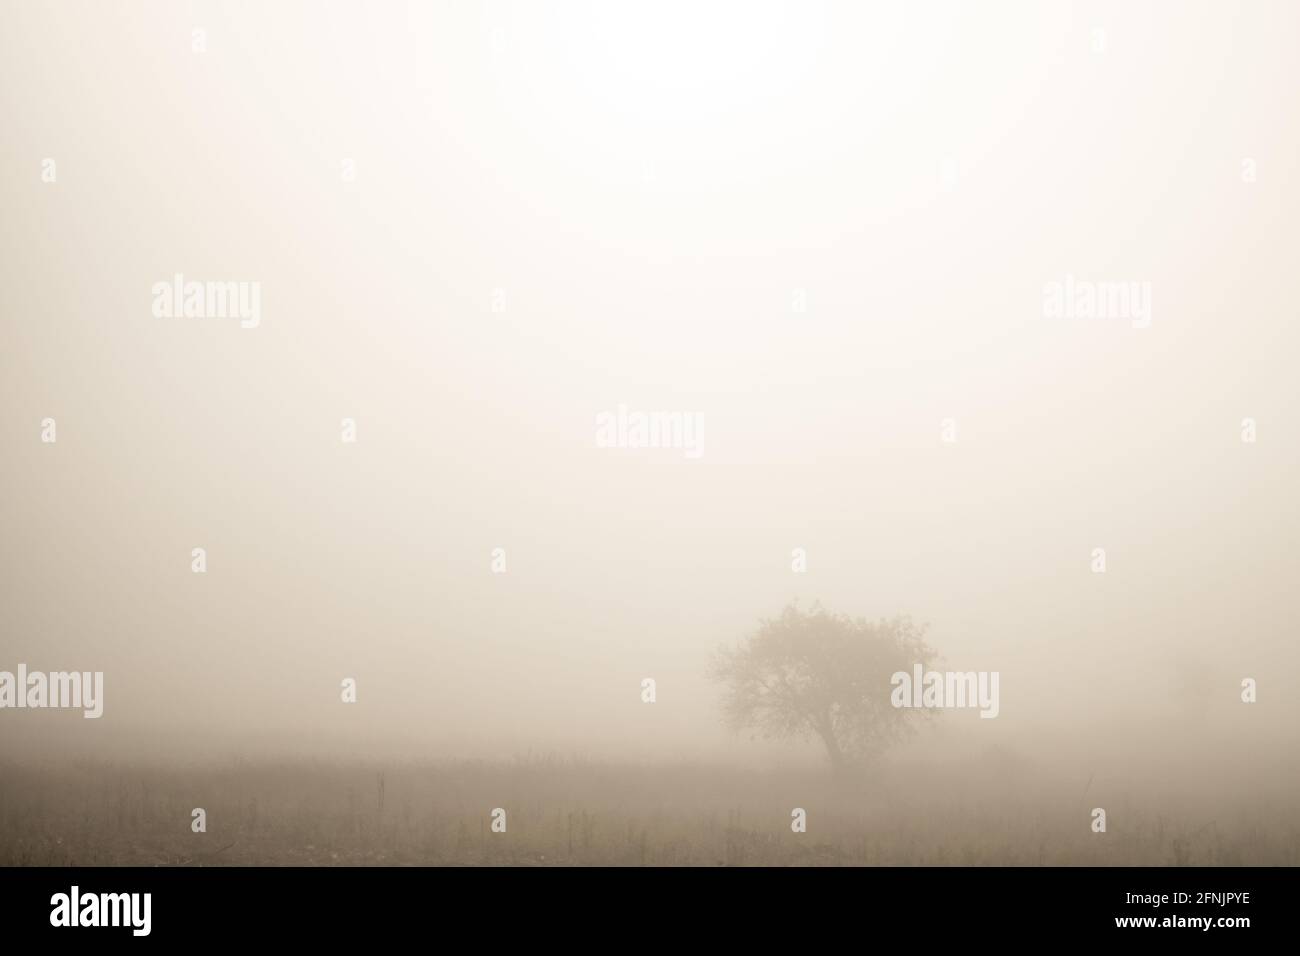 A single tree standing in the distance on a farm field in the heavy early morning mist between Kalaw and Inle Lake, Shan state, Myanmar Stock Photo